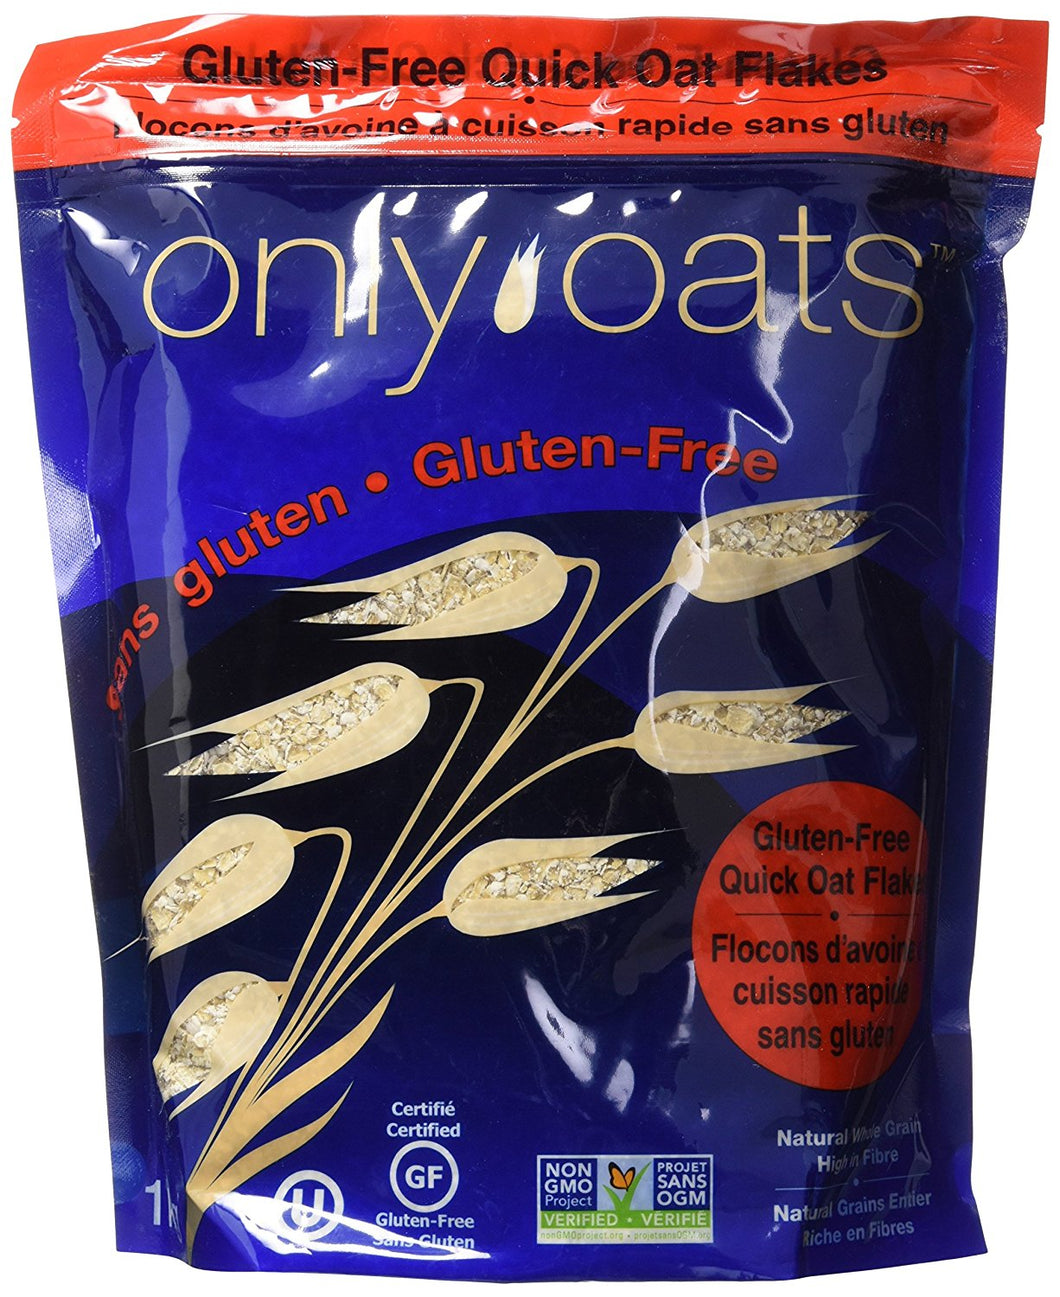 Only Oats Gluten-Free Quick Oat Flakes (1kg)